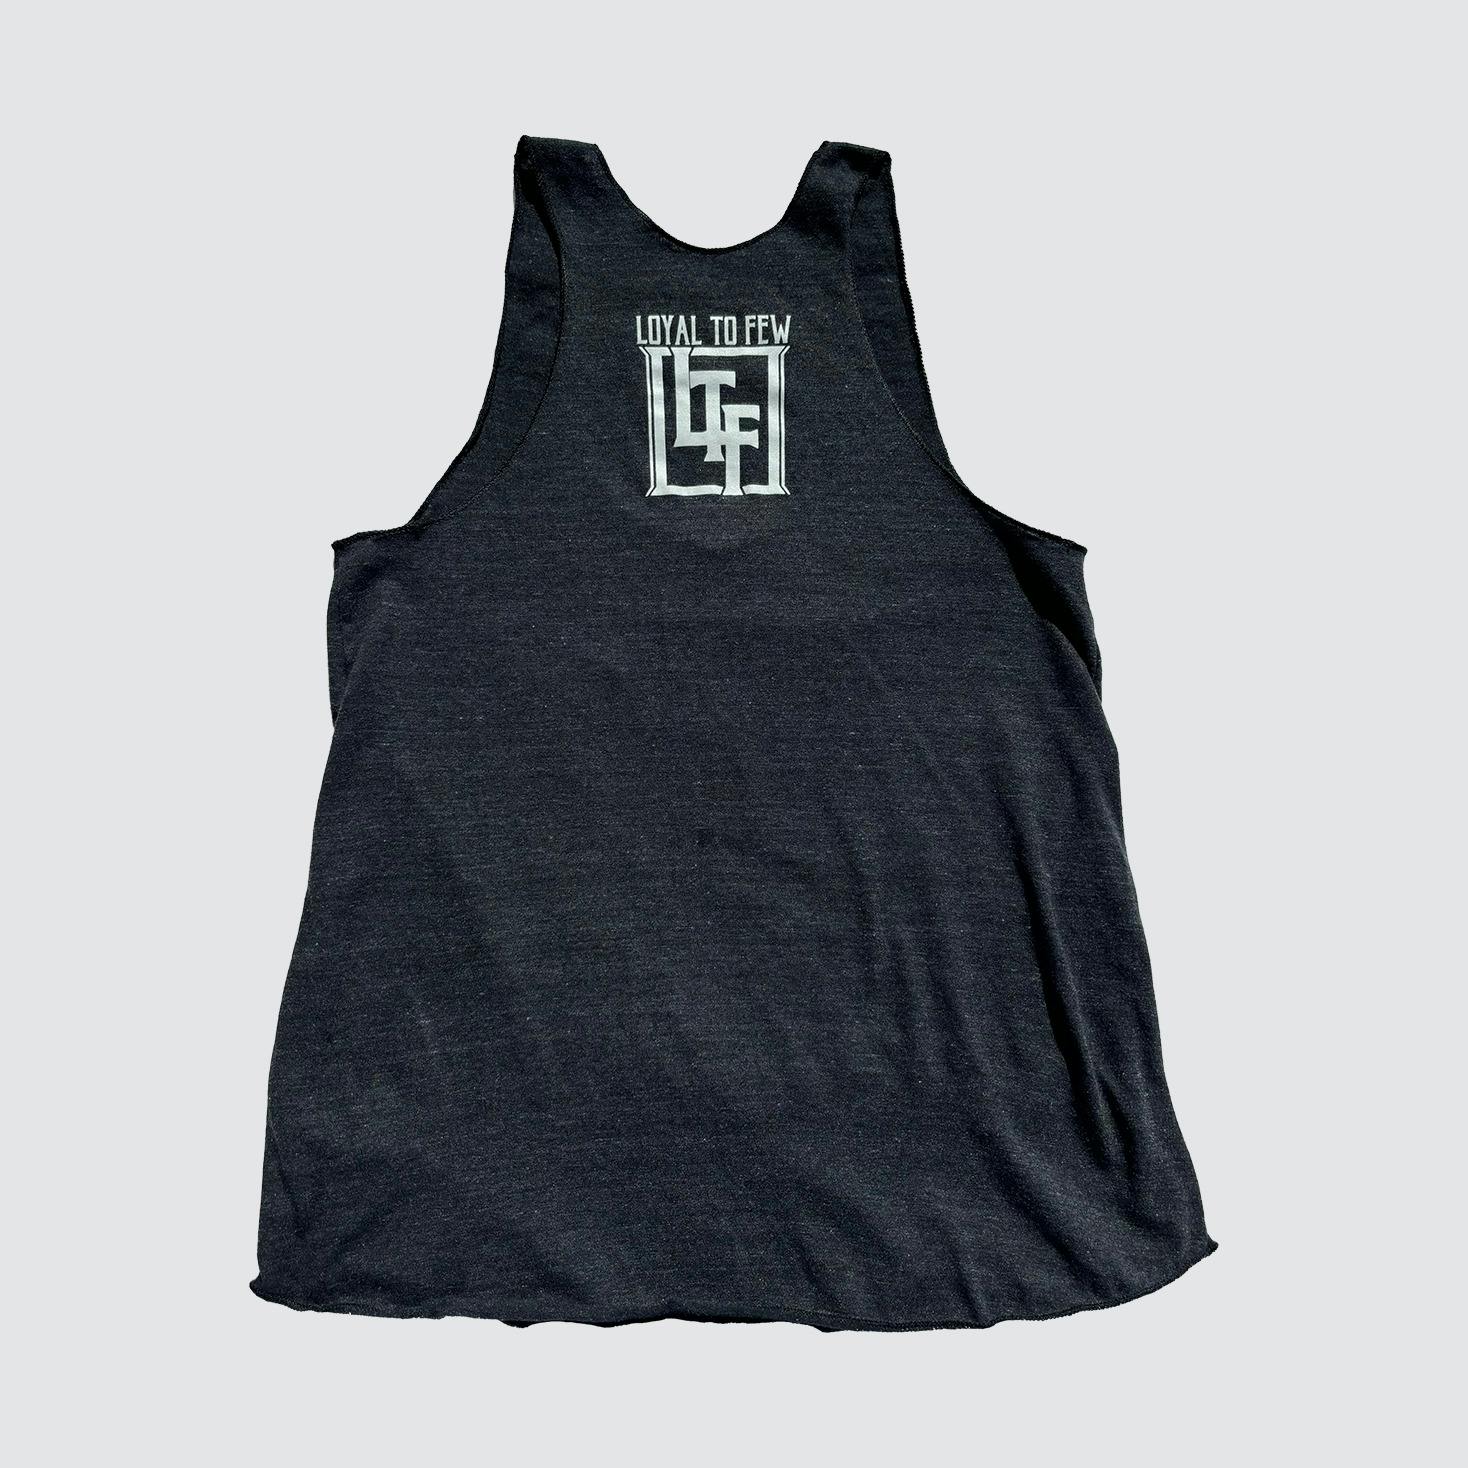 Tri-Blend Tank with Stenciled 1